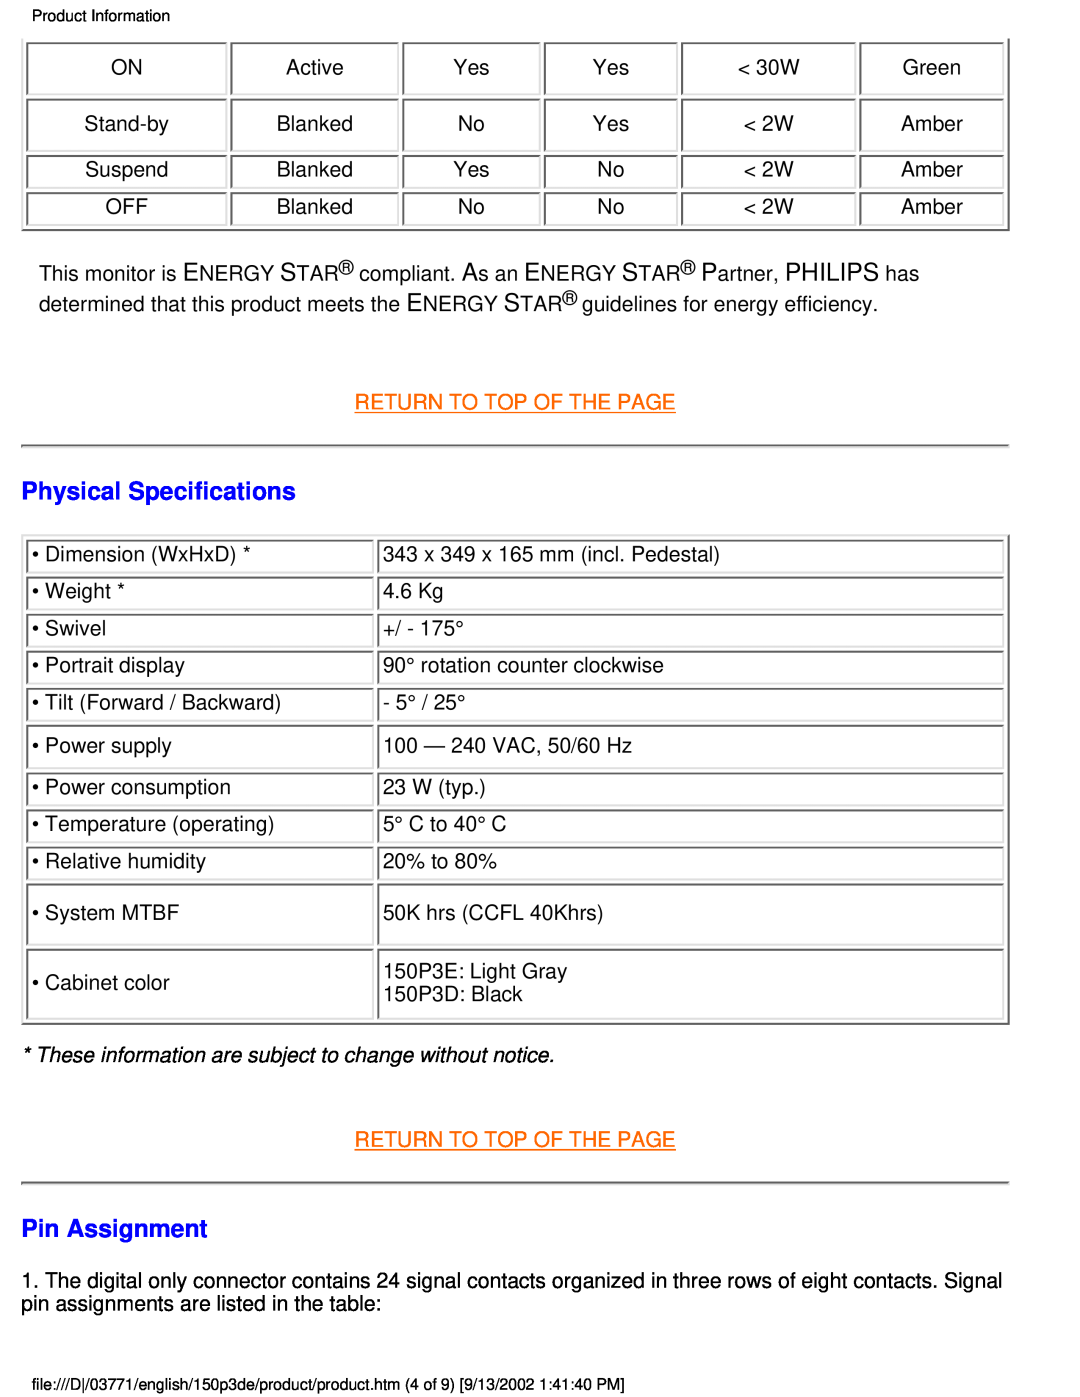 Philips 150P3E user manual Physical Specifications, Pin Assignment, Return To Top Of The Page 